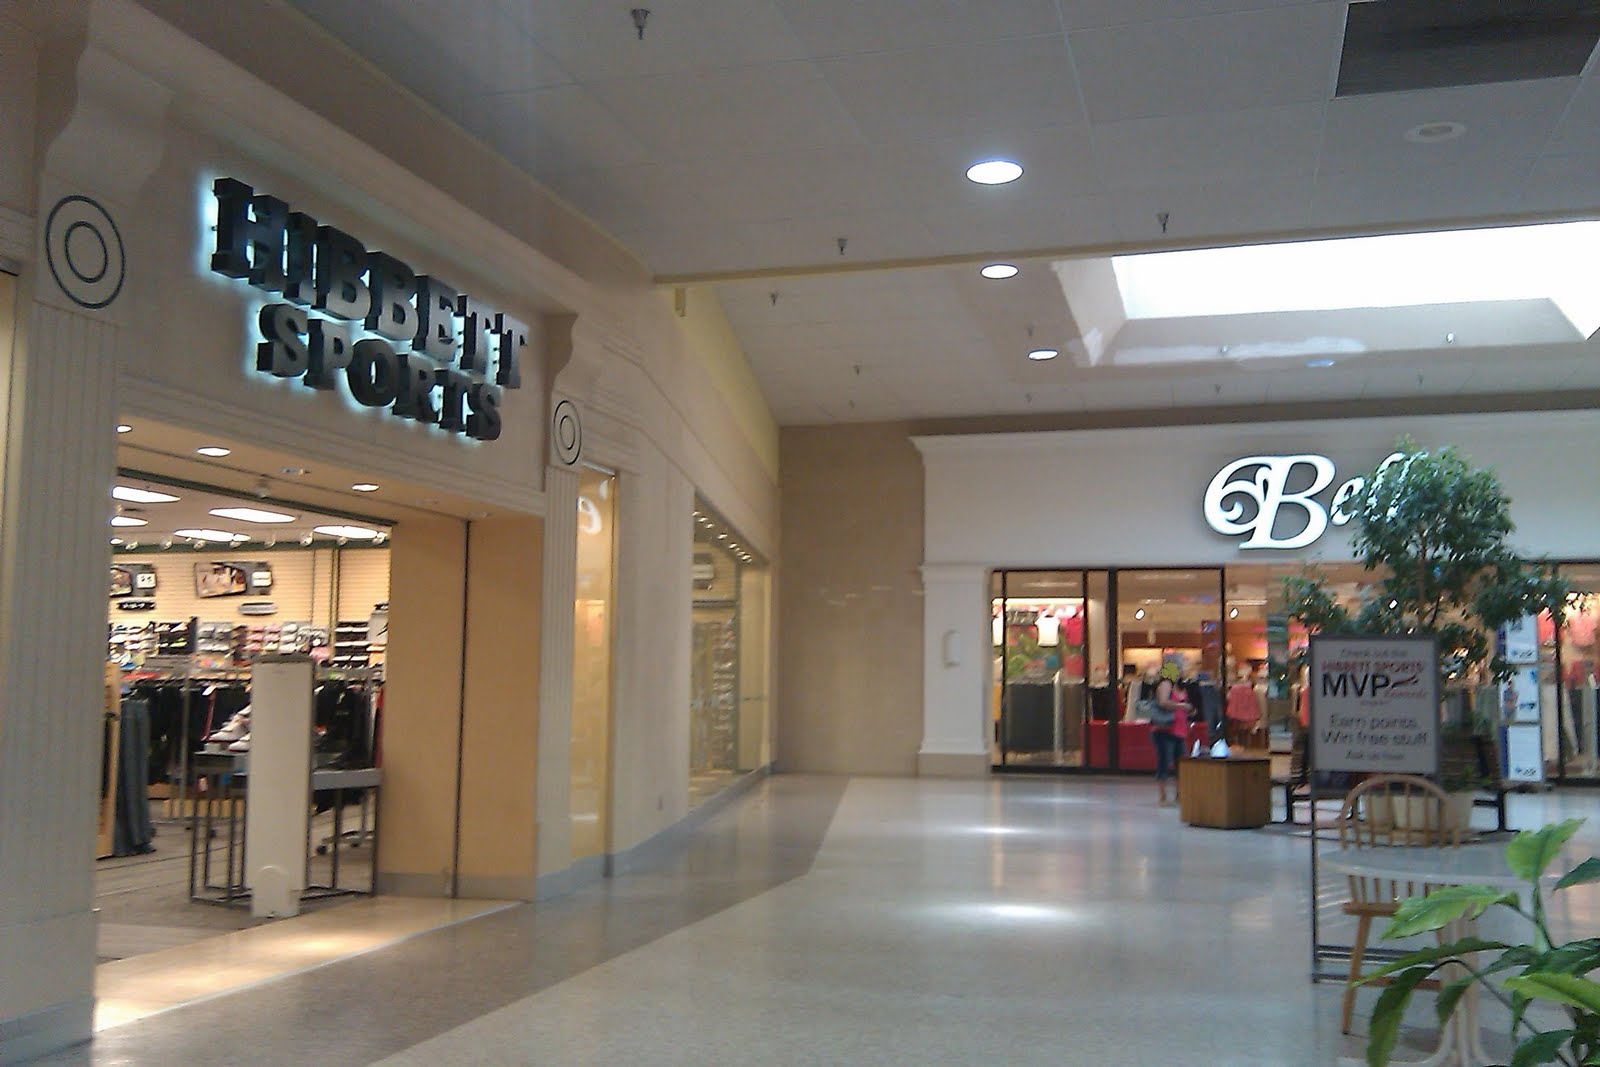 ... Southern Malls and Retail: University Mall Revisit Nacogdoches Texas